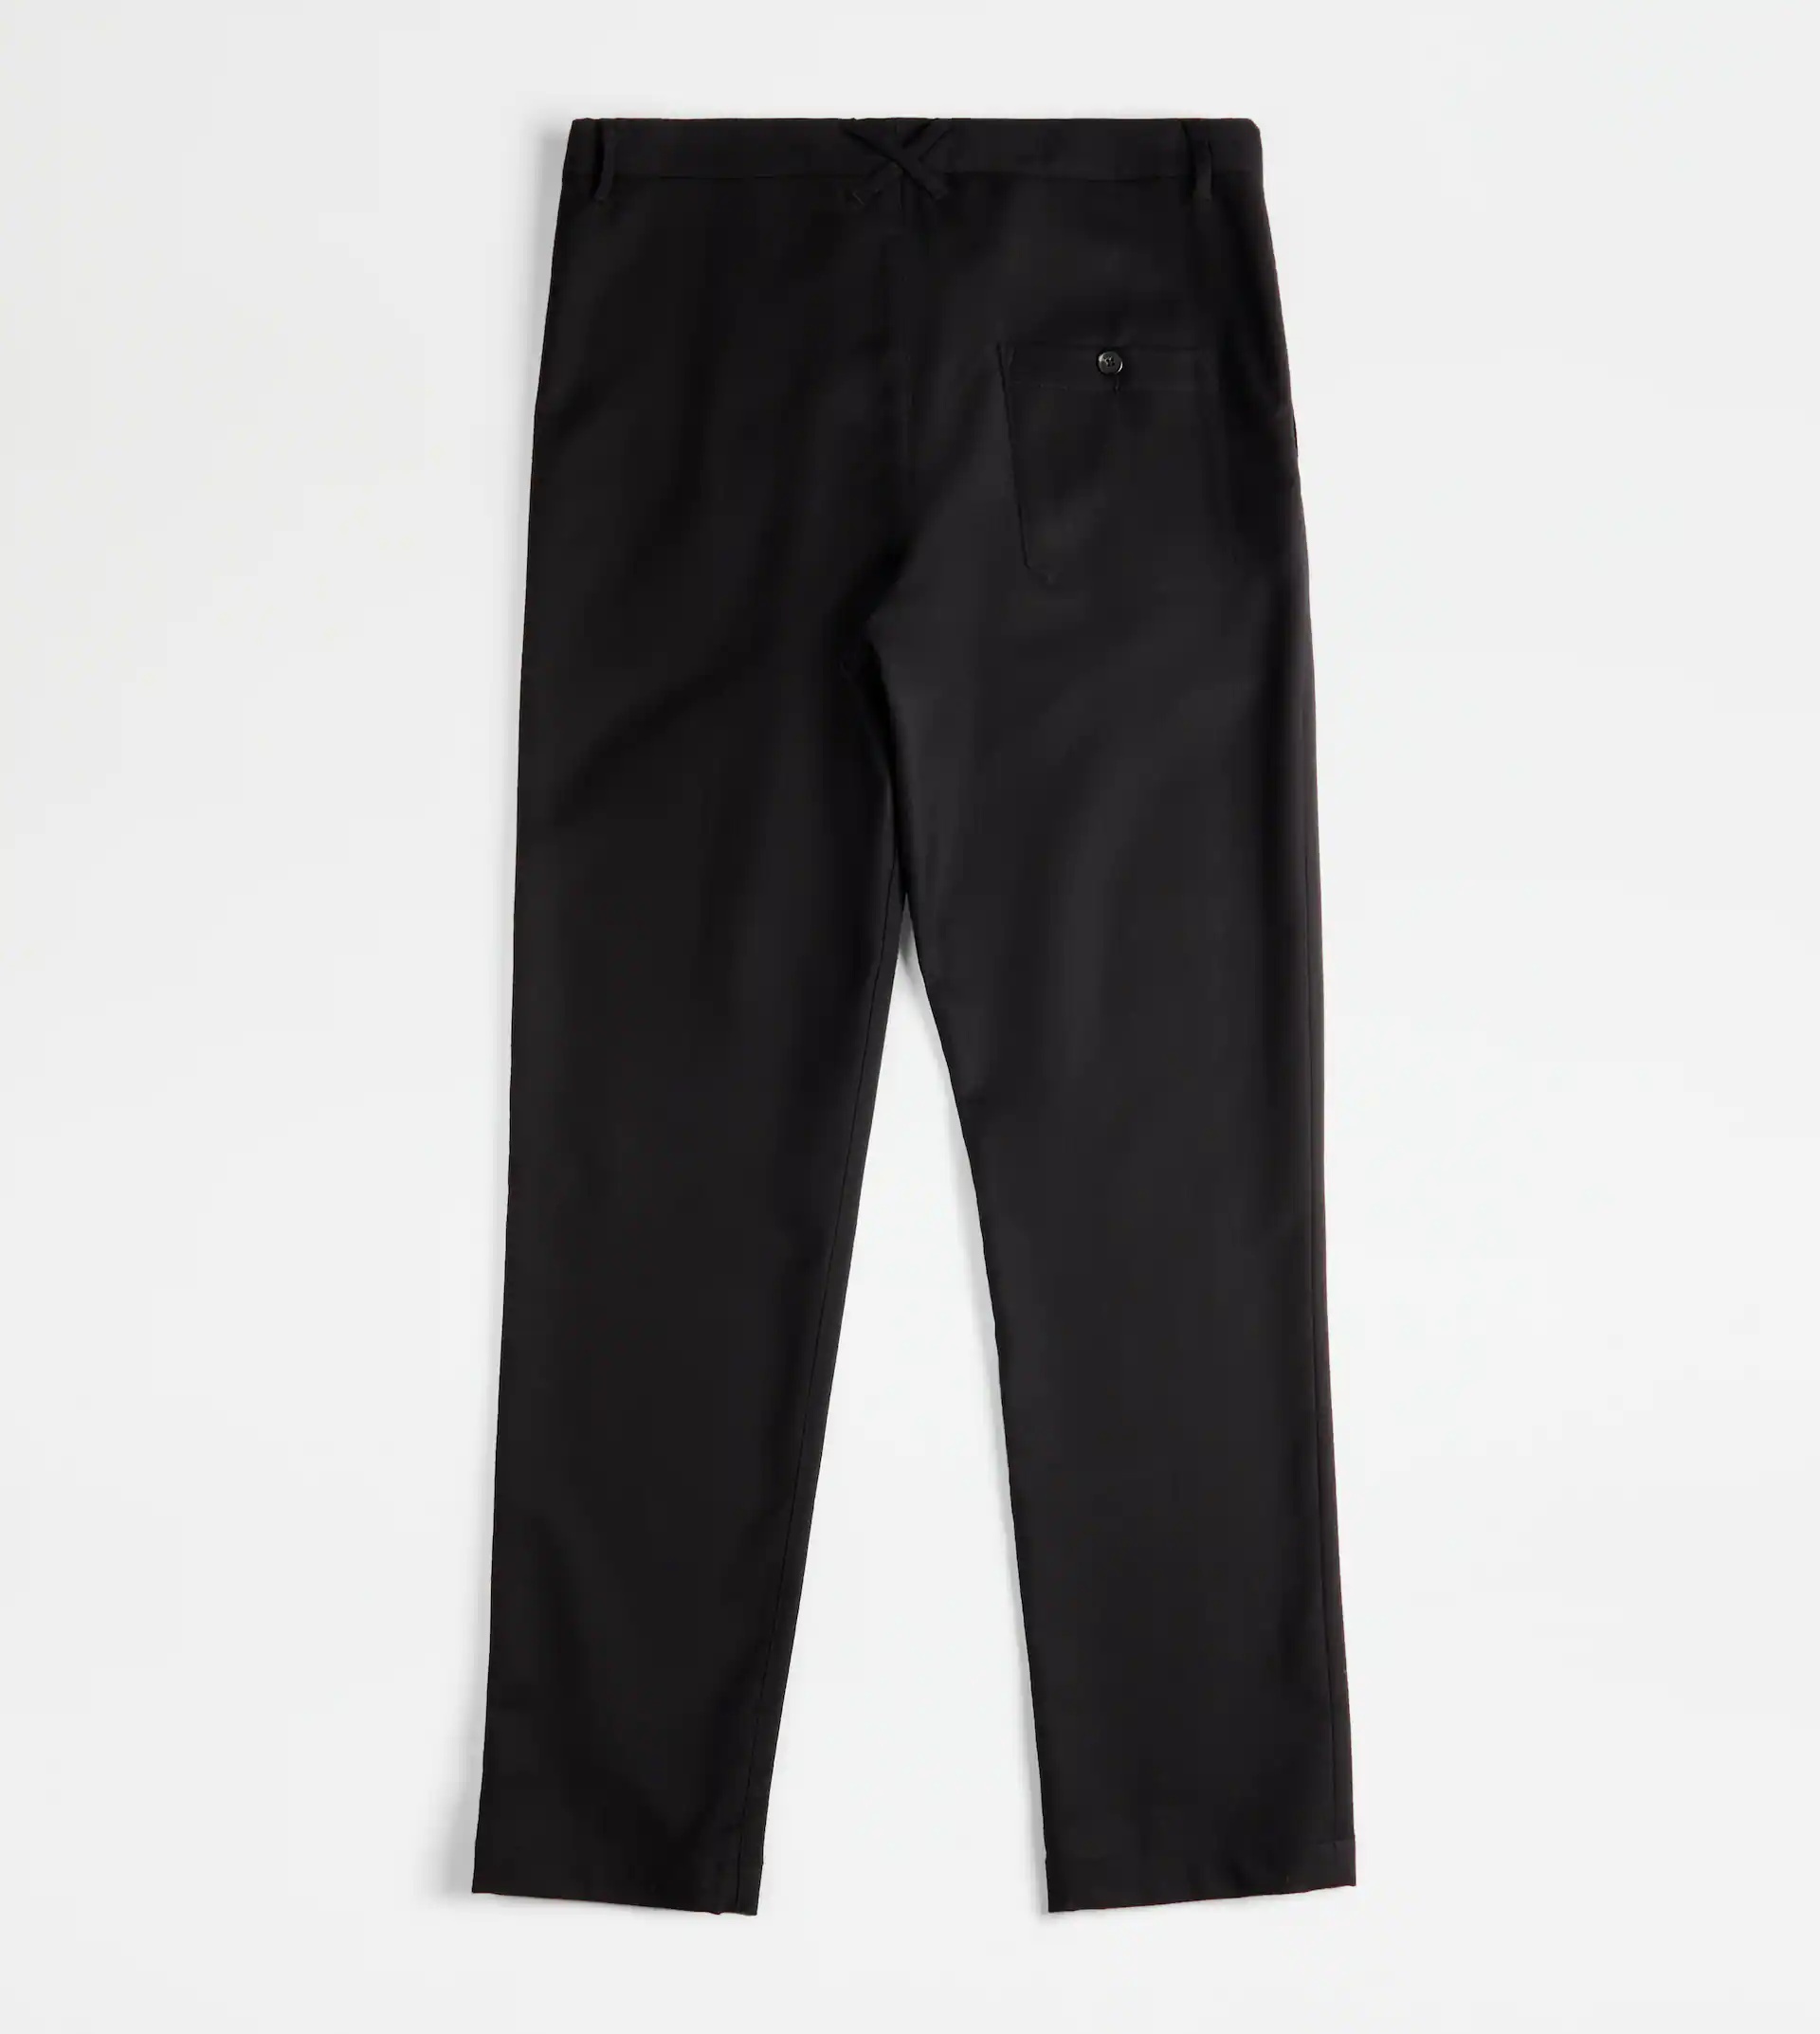 TOD'S CHINO TROUSERS ADJUSTABLE WAISTBAND - BLACK - 8